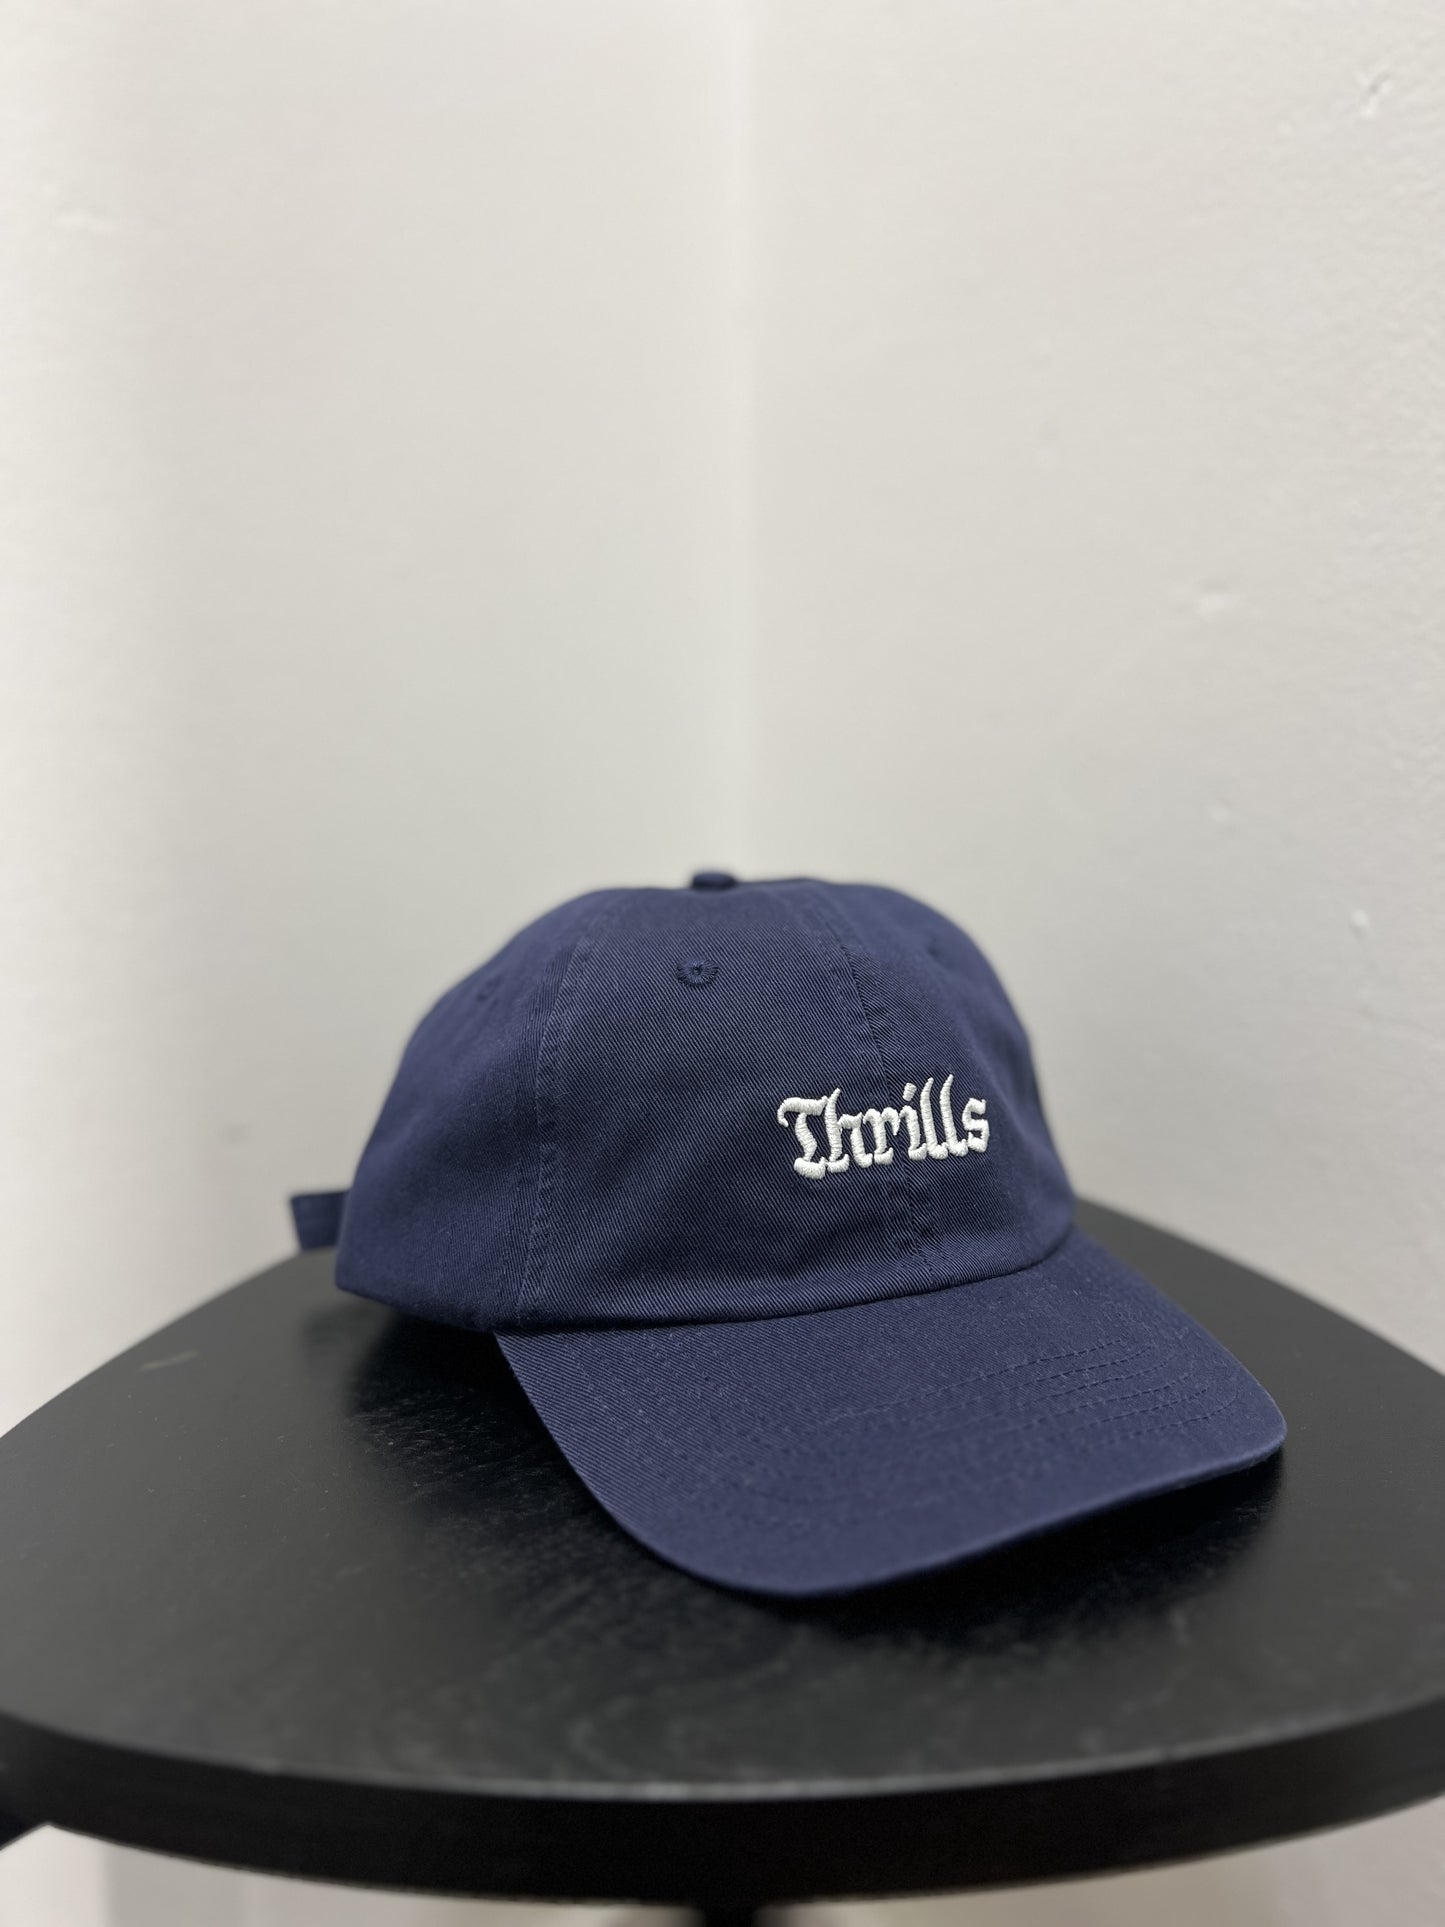 WISHES COME TRUE 6 PANEL CAP - STATION NAVY